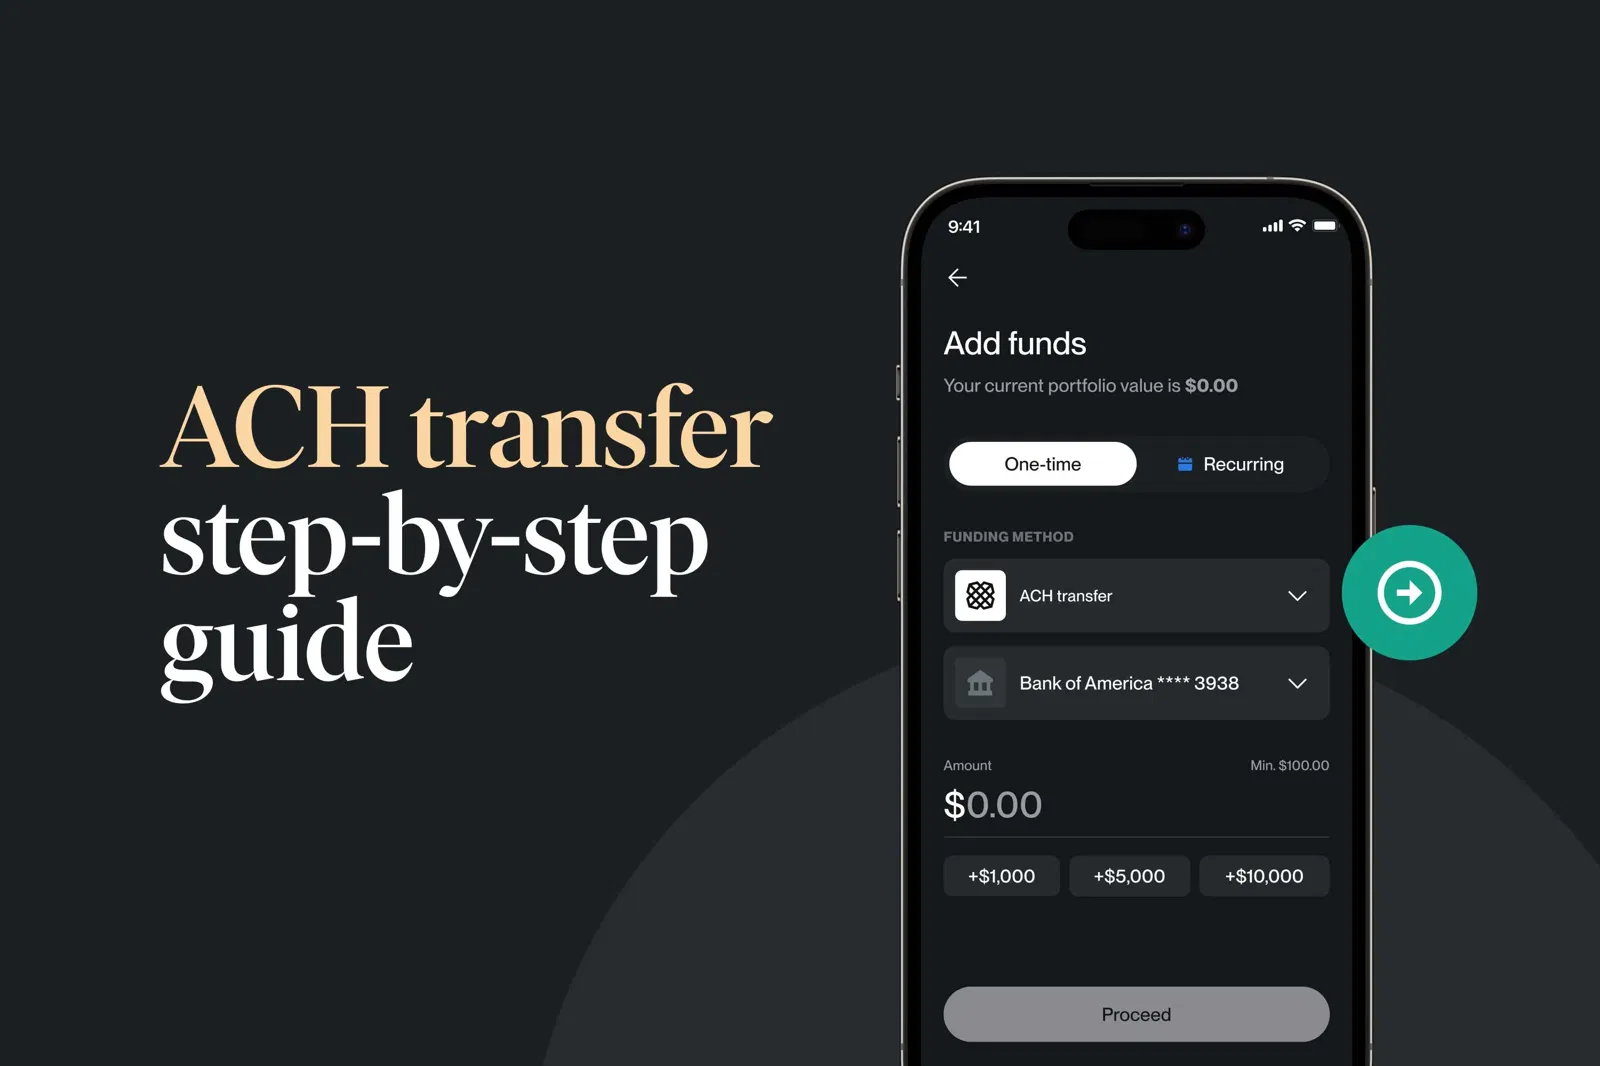 ACH transfer step-by-step guide for easy investments